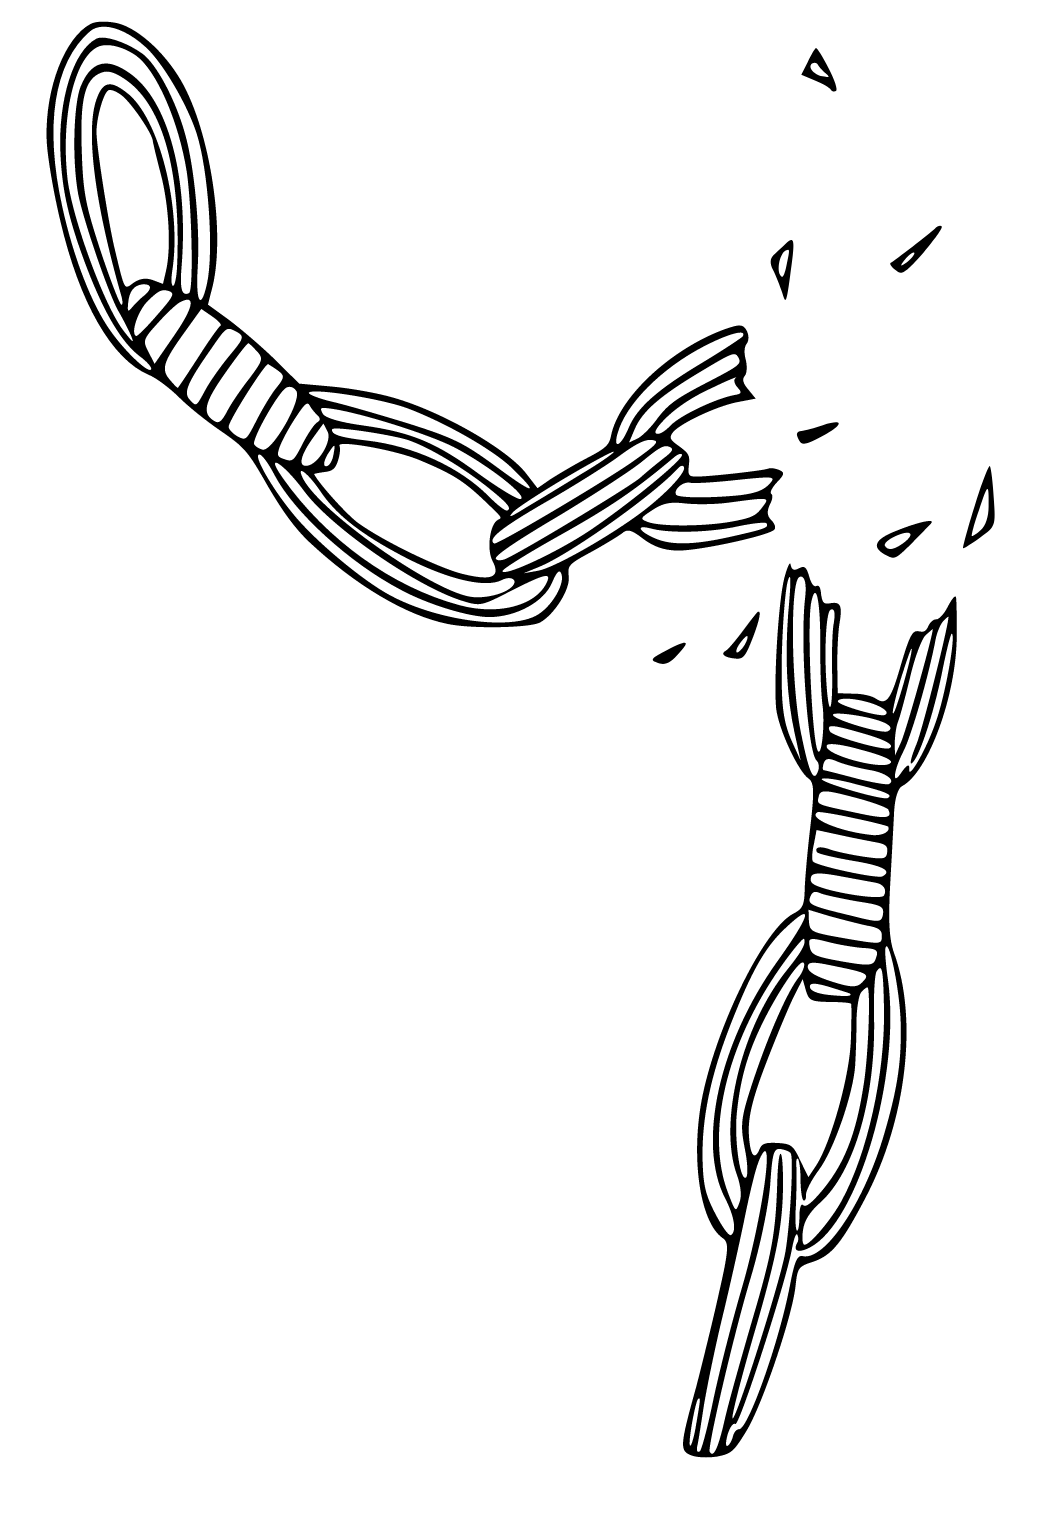 Free printable juneteenth chains coloring page for adults and kids